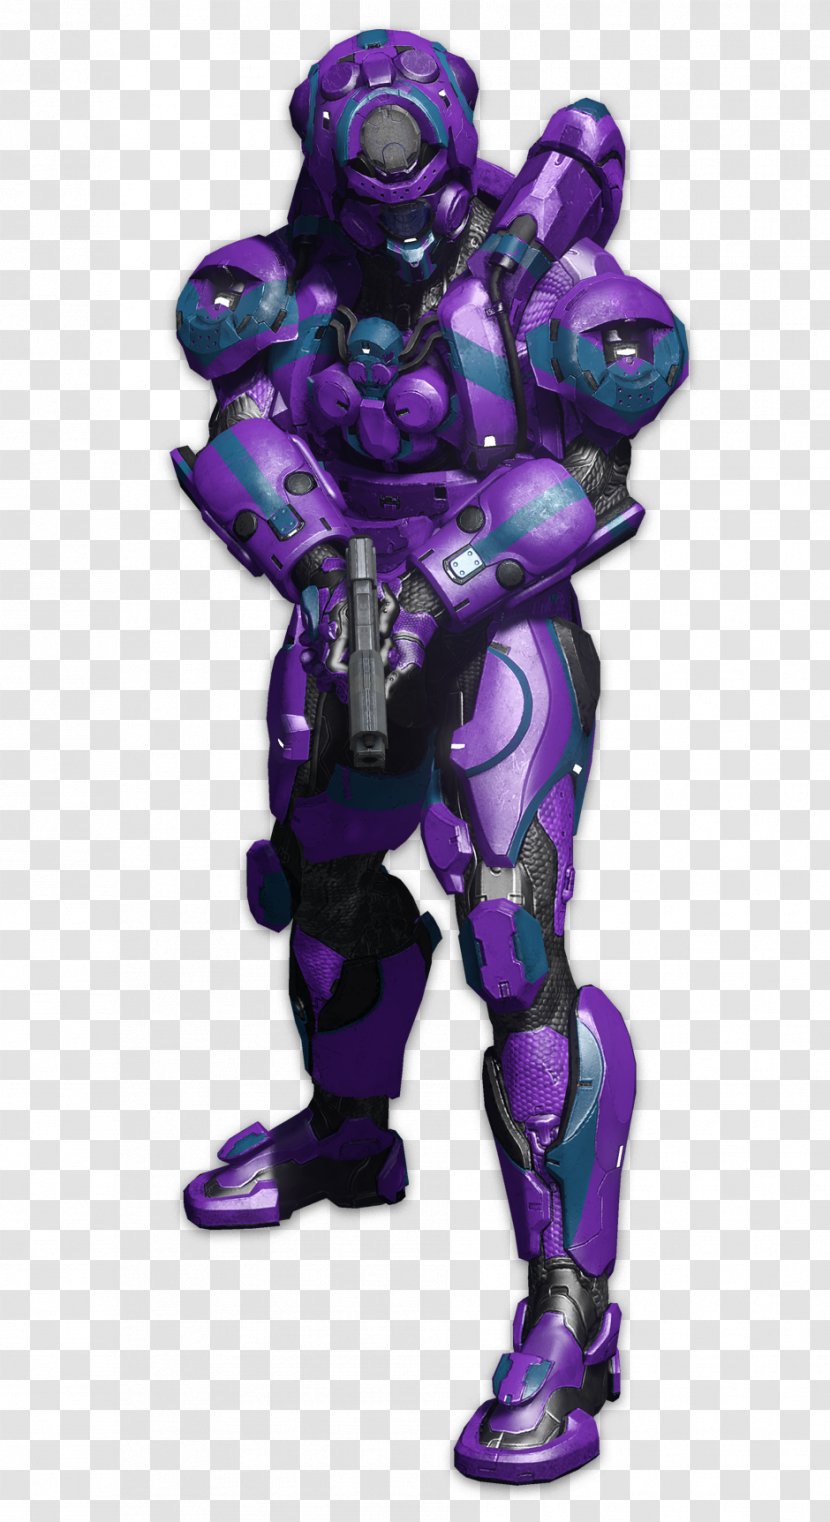 Halo 4 3 Halo: Reach Combat Evolved 2 - Fictional Character - Glowing Transparent PNG